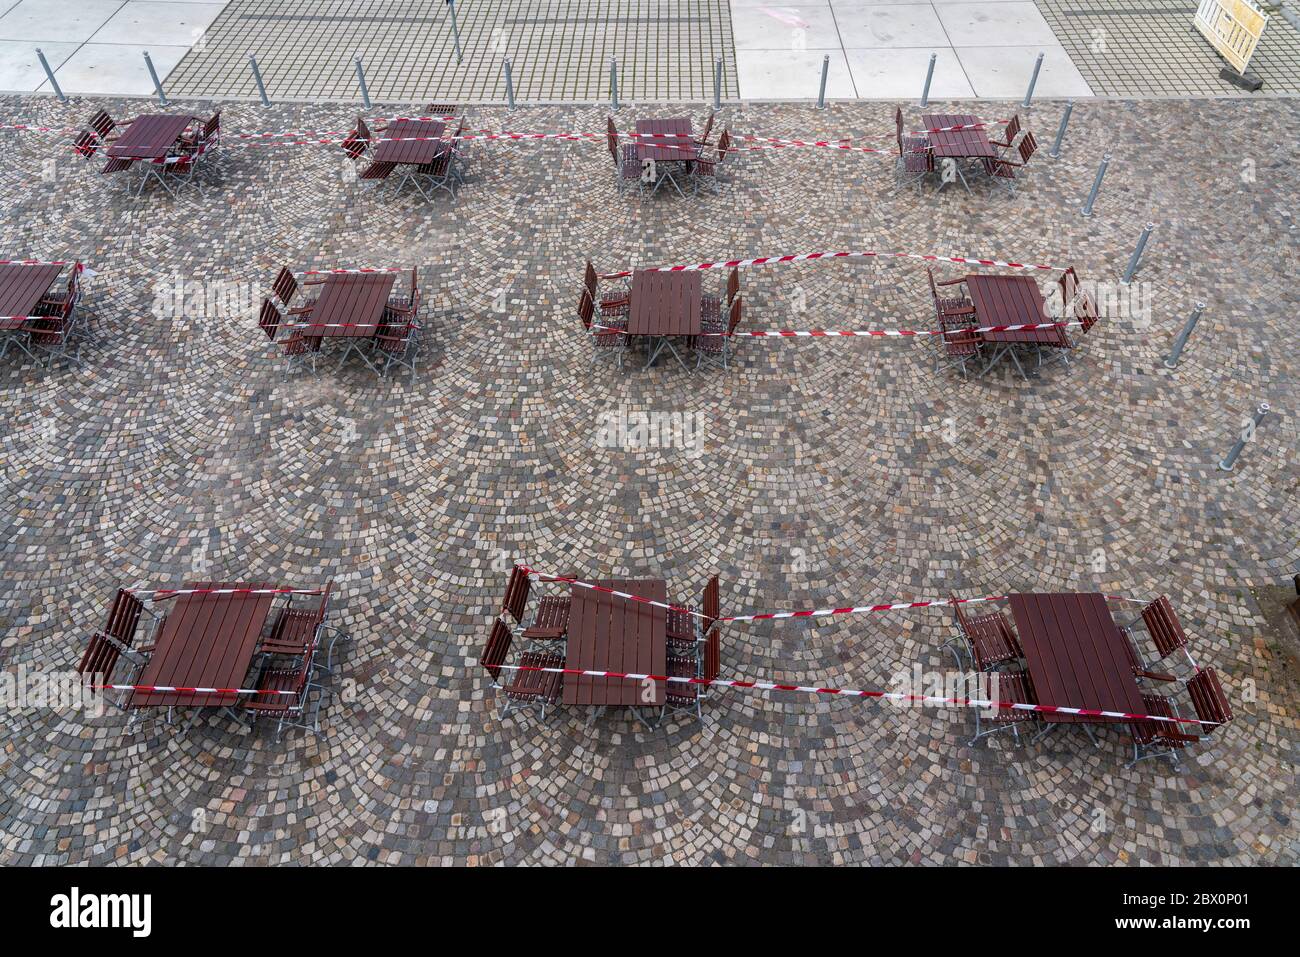 Gastronomy during the Corona crisis, locked tables in beer garden, Essen, Ruhr area, NRW, Germany Stock Photo